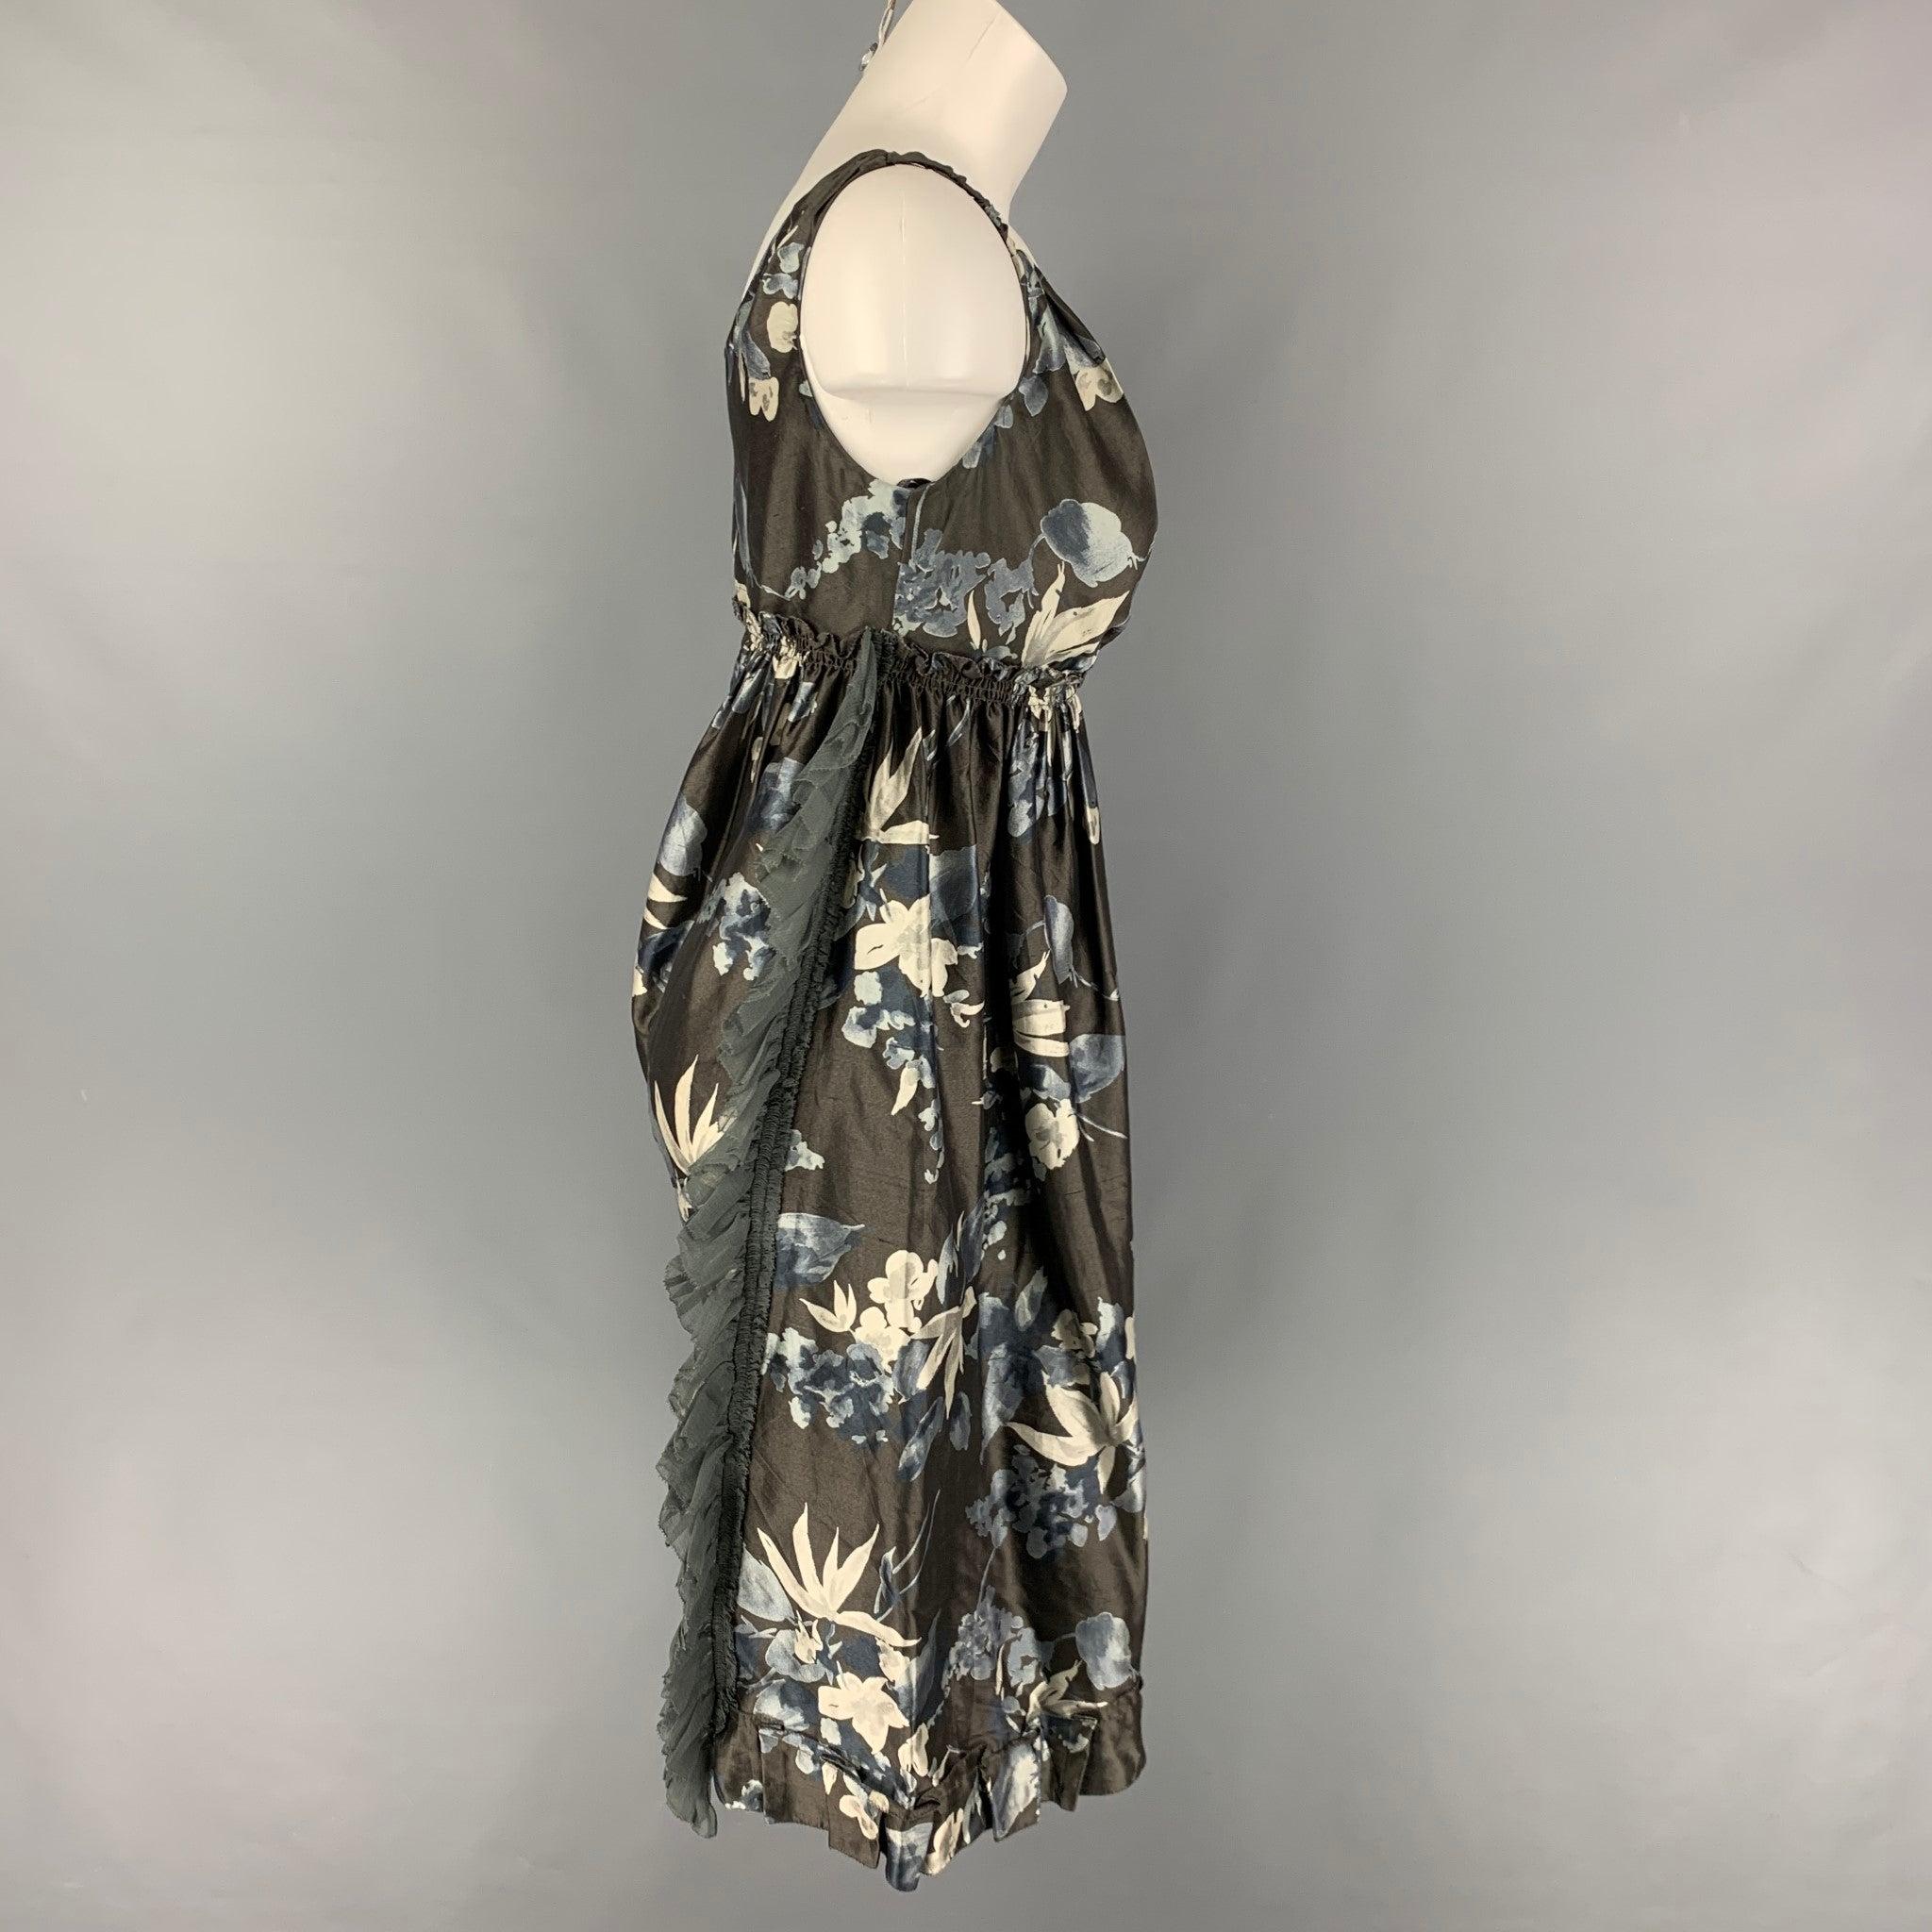 VERA WANG dress comes in a slate & cream floral silk featuring an a-line style, elastic detail, ruffled detail, and a side zipper closure. Made in USA.Very Good Pre-Owned Condition. 

Marked:   4 

Measurements: 
  Bust: 31 inches  Waist: 28 inches 